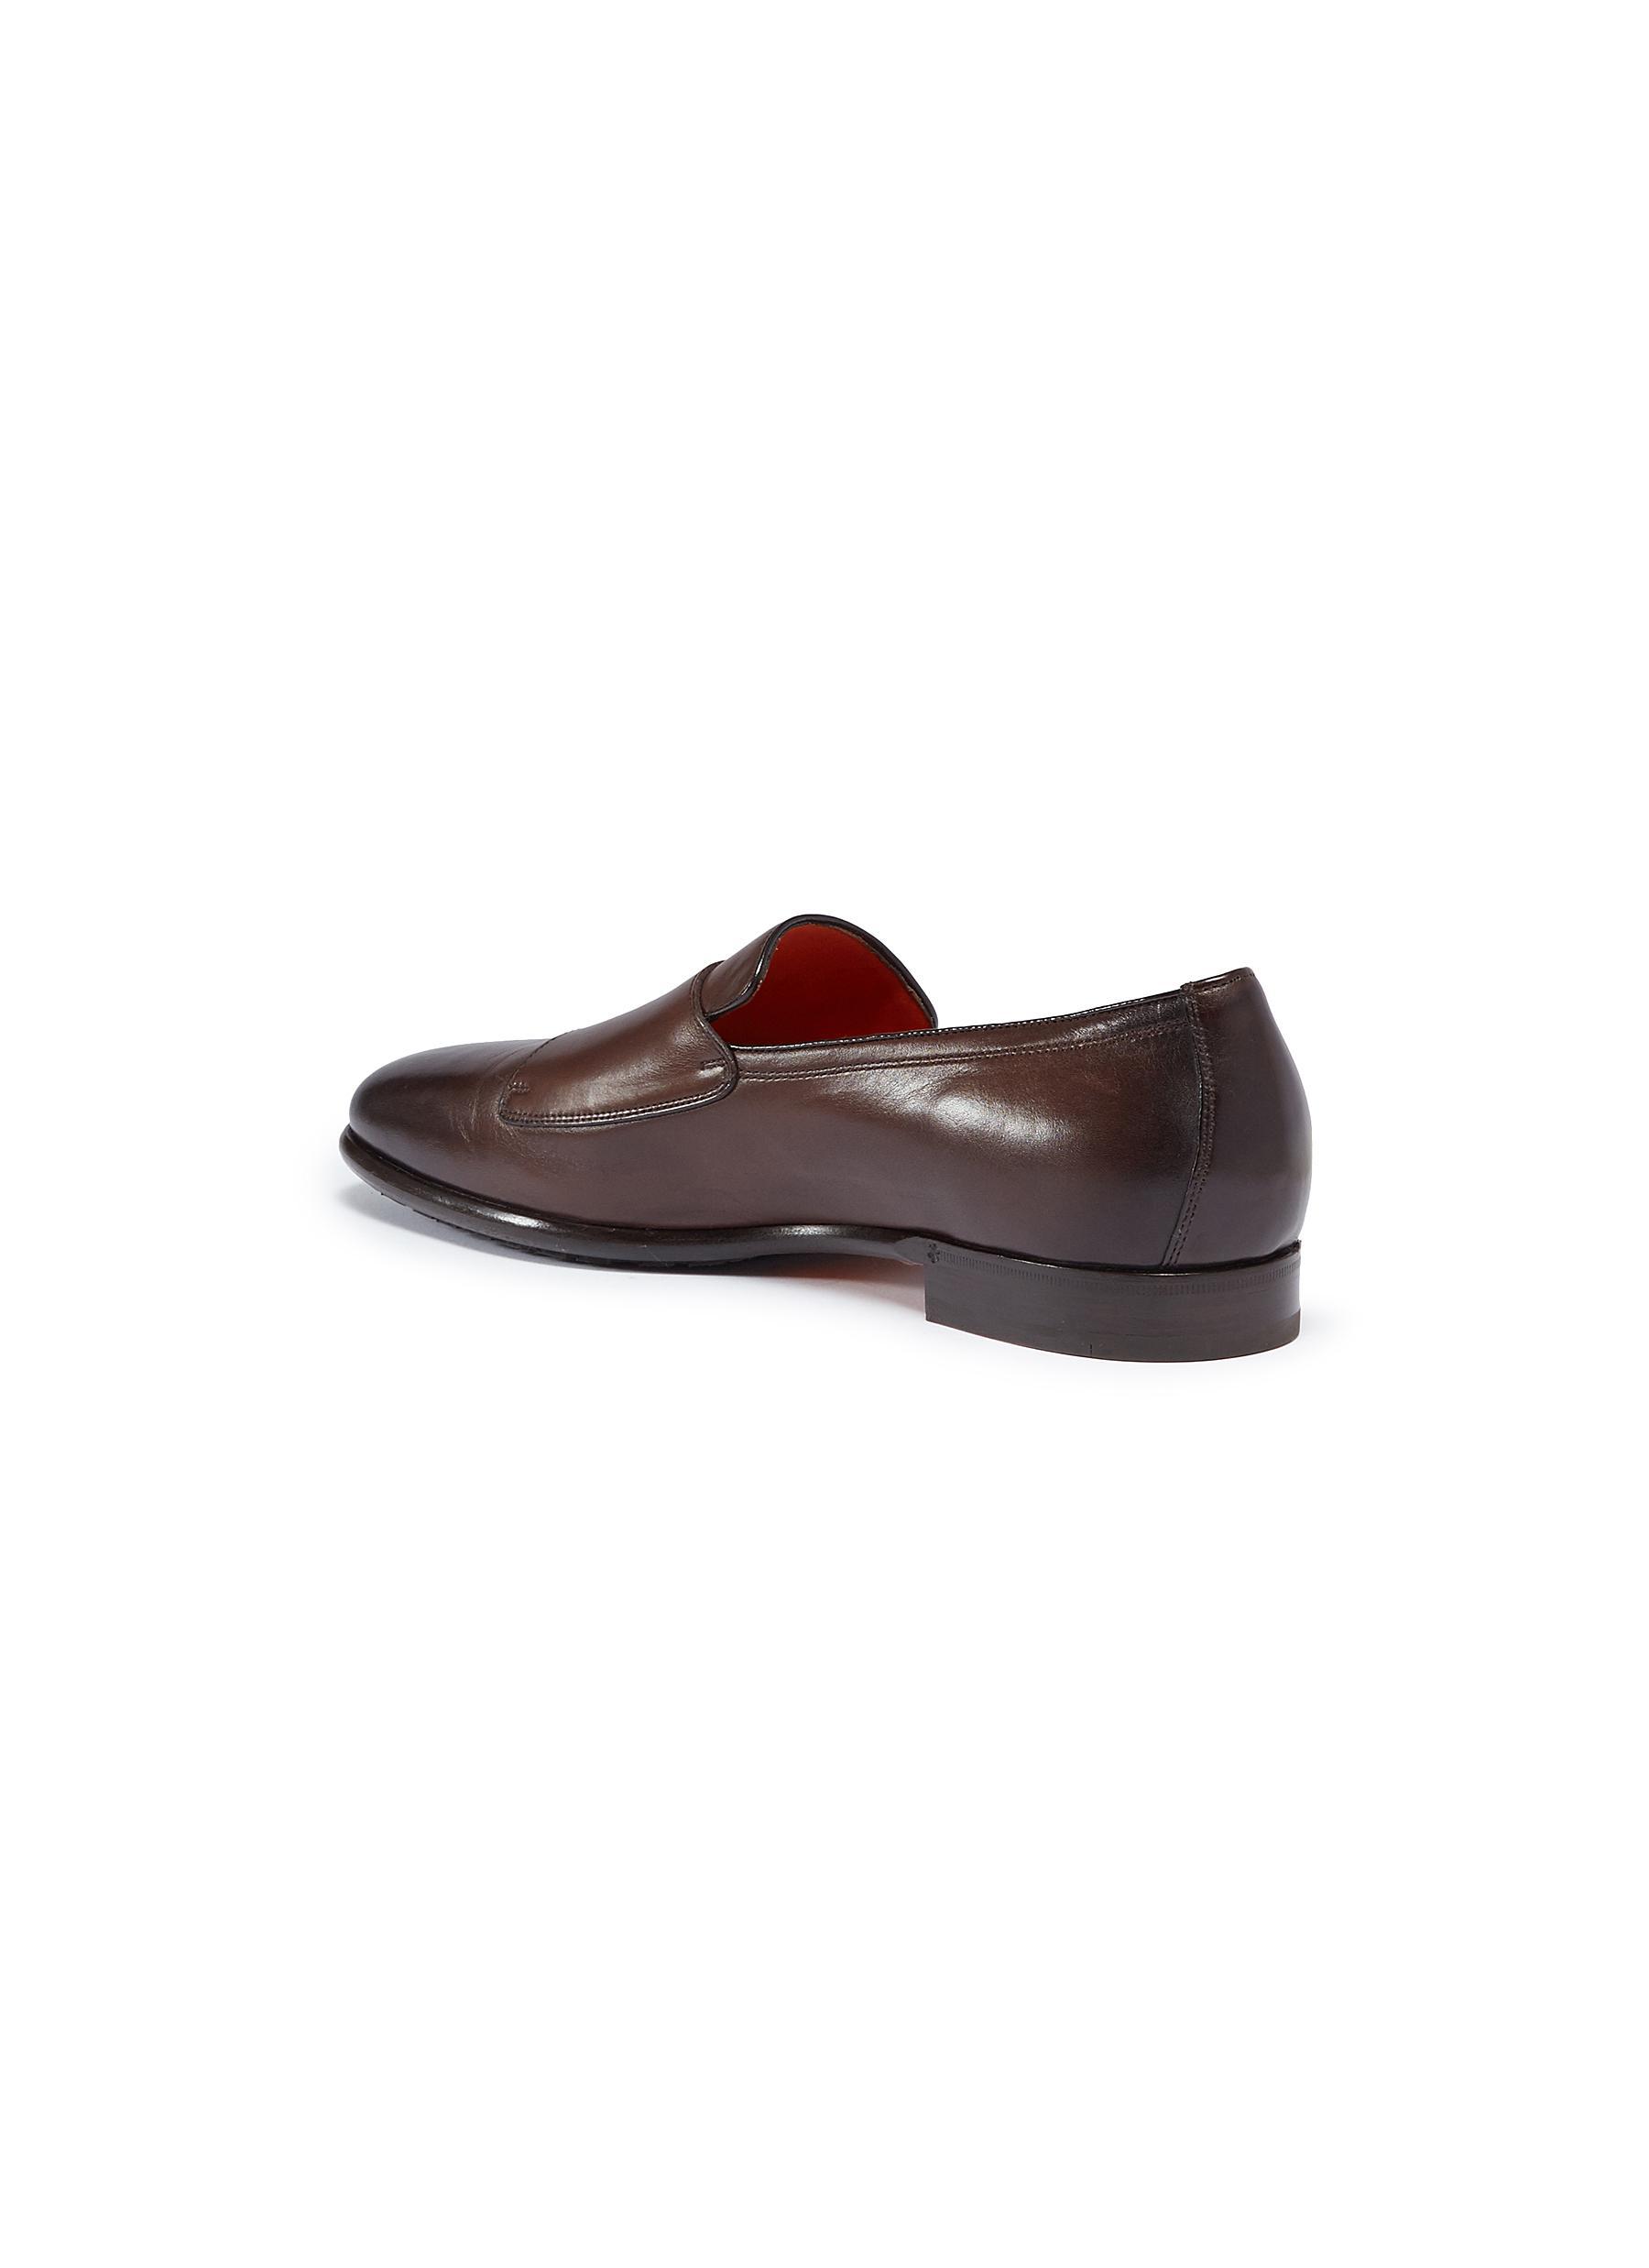 Santoni Double Monk Strap Leather Loafers in Dark Brown (Brown 